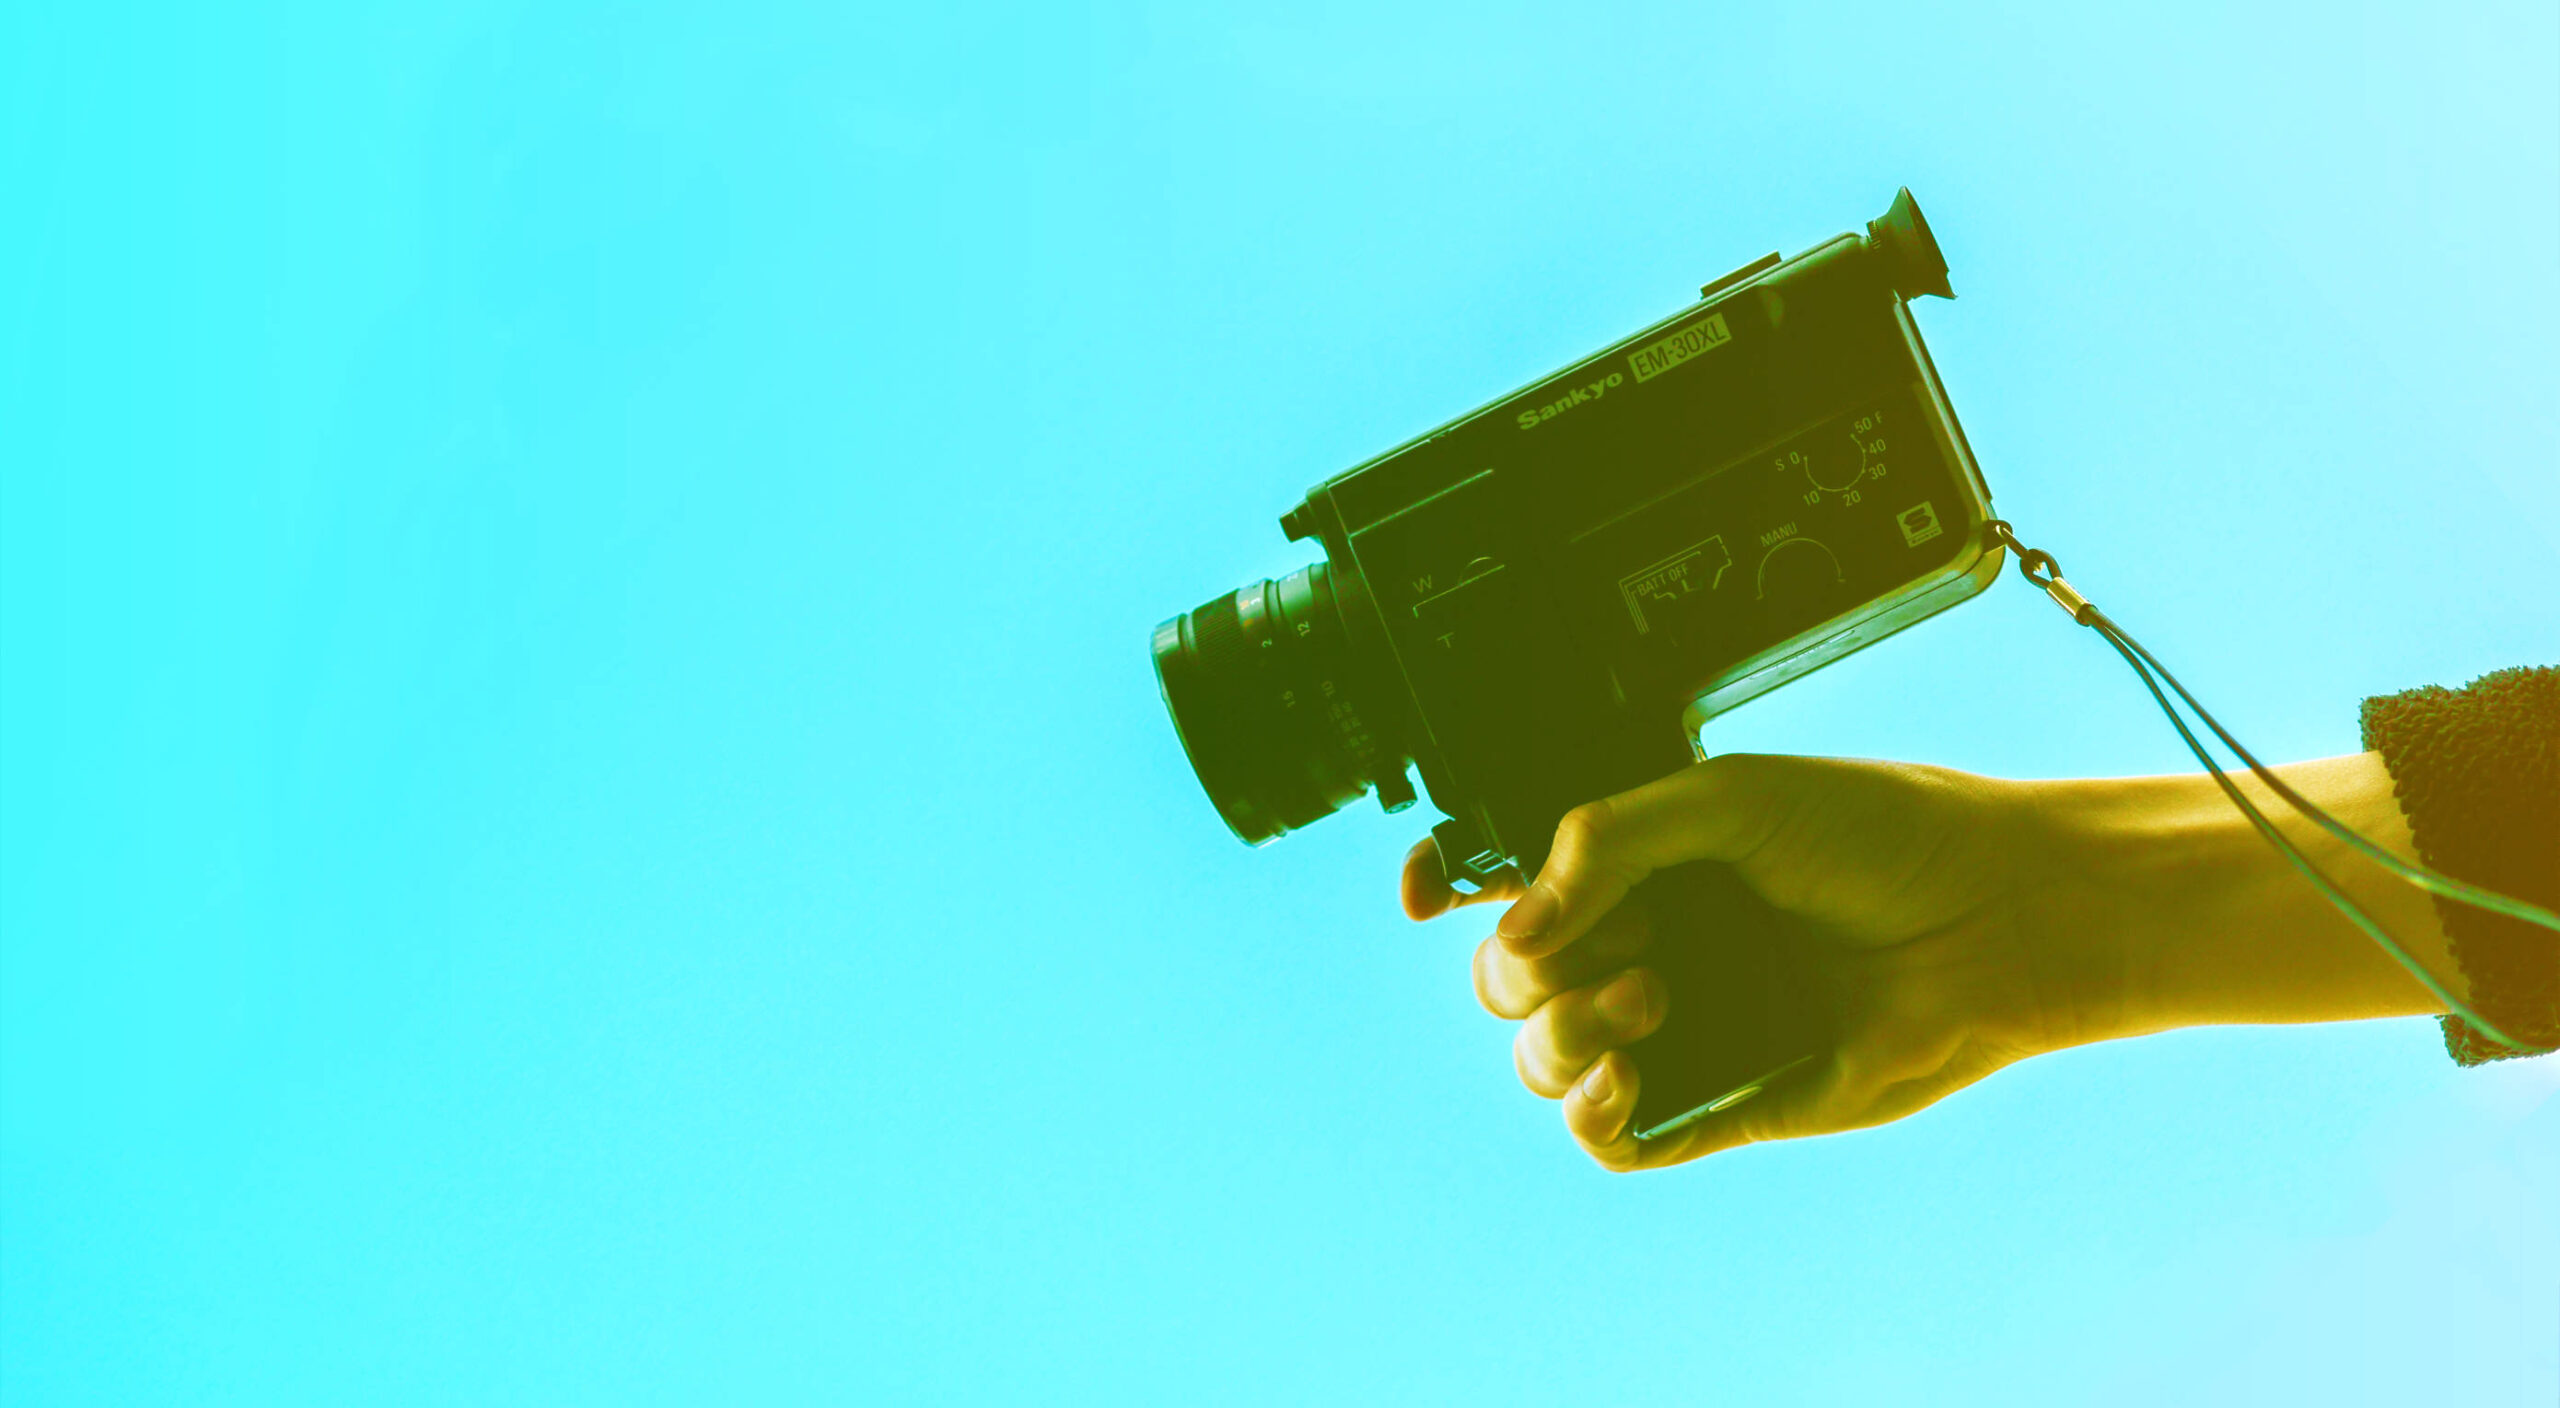 10 Tips to Help Video Content Succeed in 2021